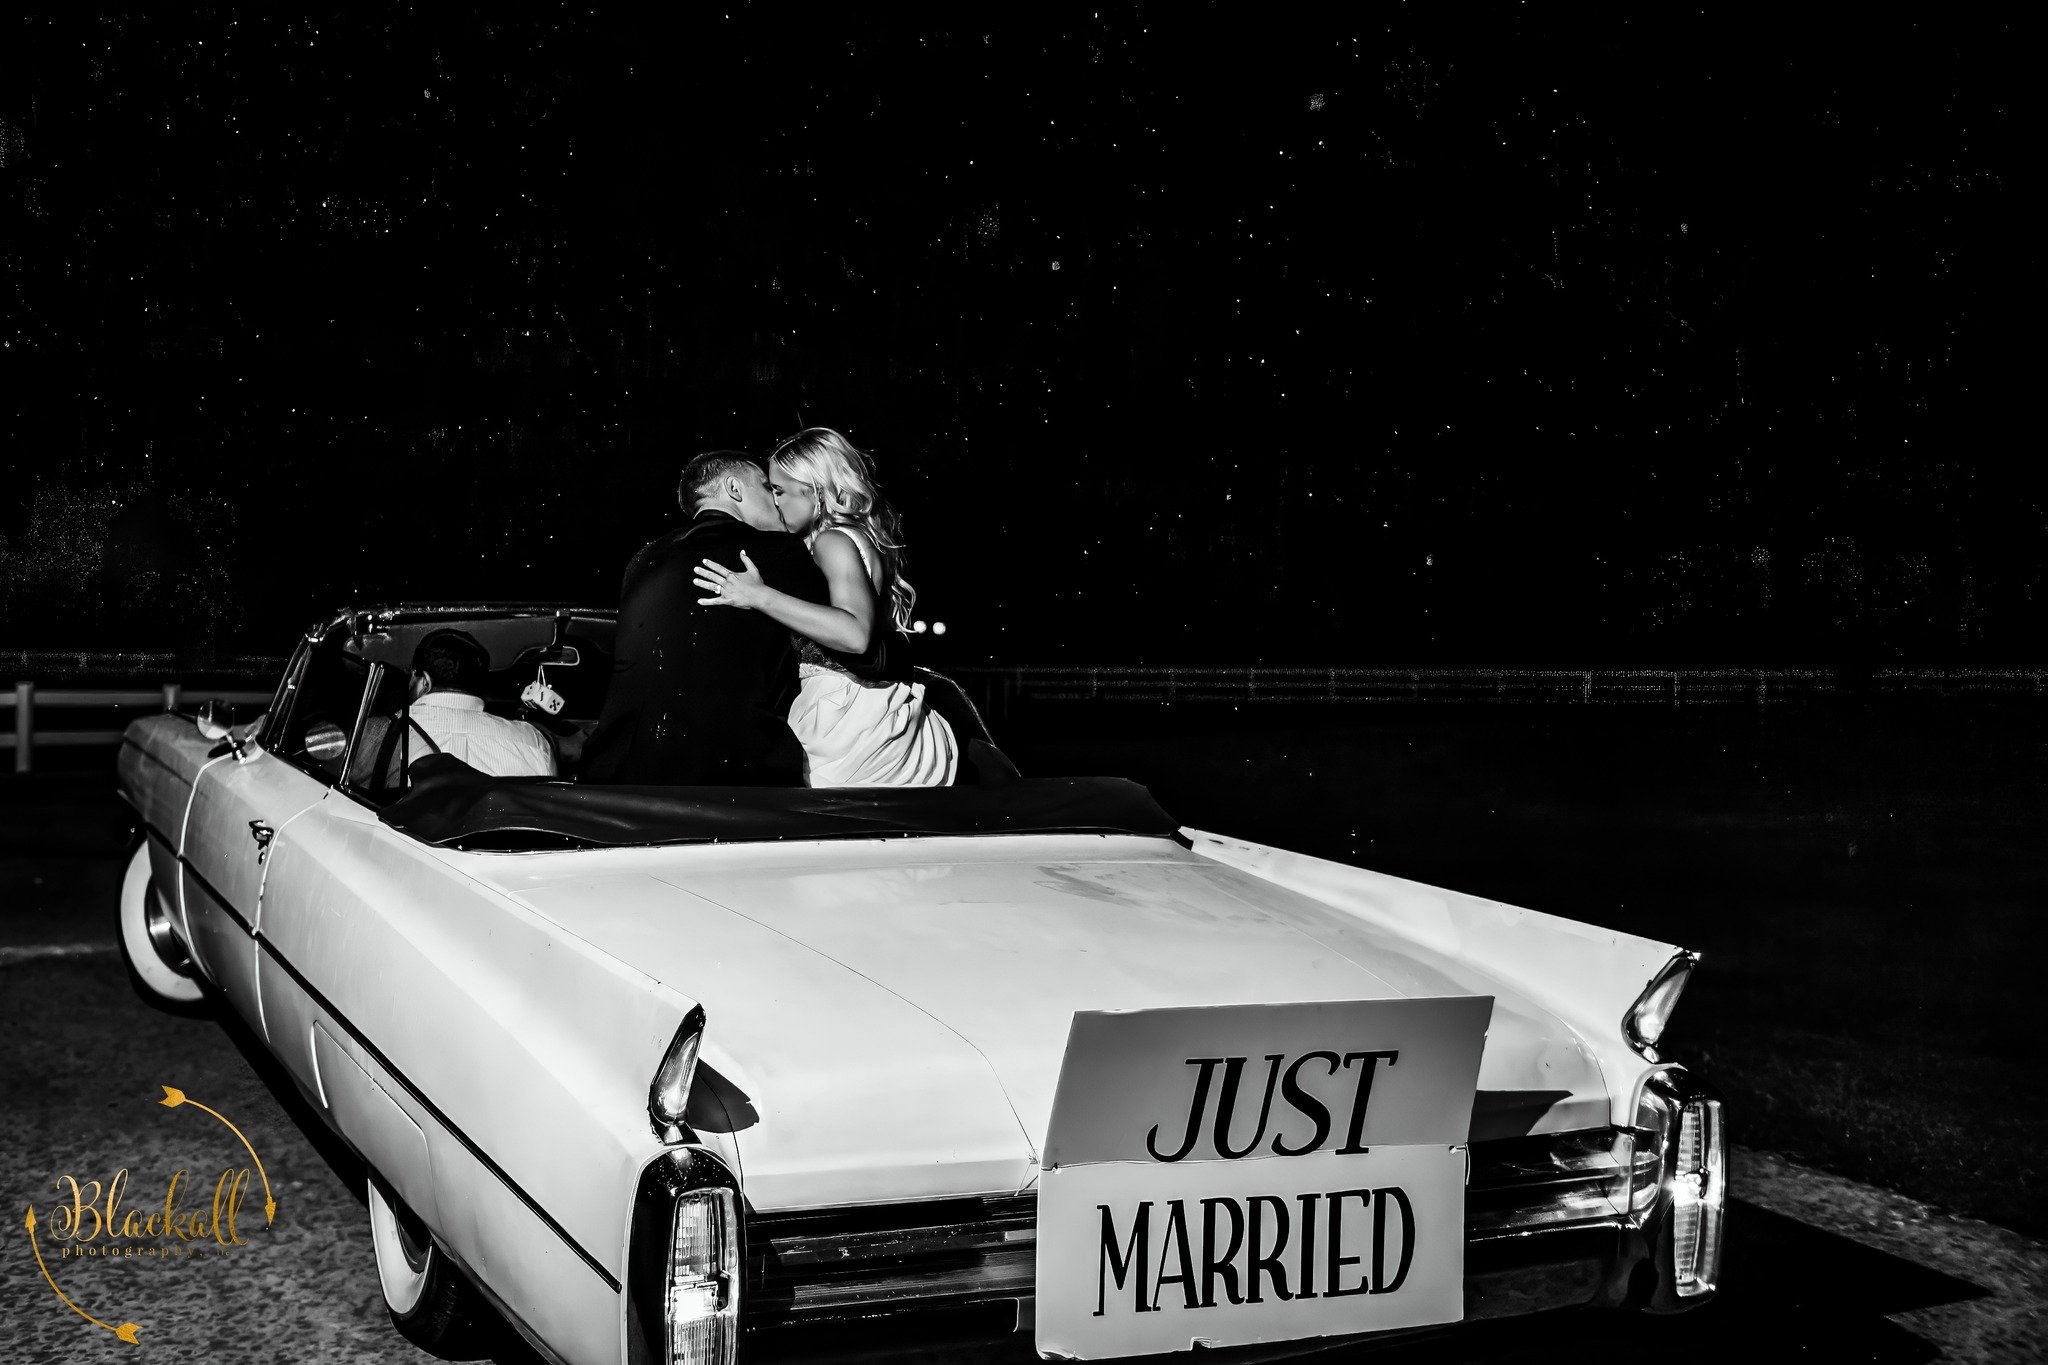 You may be cool... but you're not drive off with the top down in a Cadillac Coupe Deville while kissing in the rain cool! #swoon 

Props to our friends at @drivevinty for ensuring their clients had the getaway of their dreams... even though it meant 